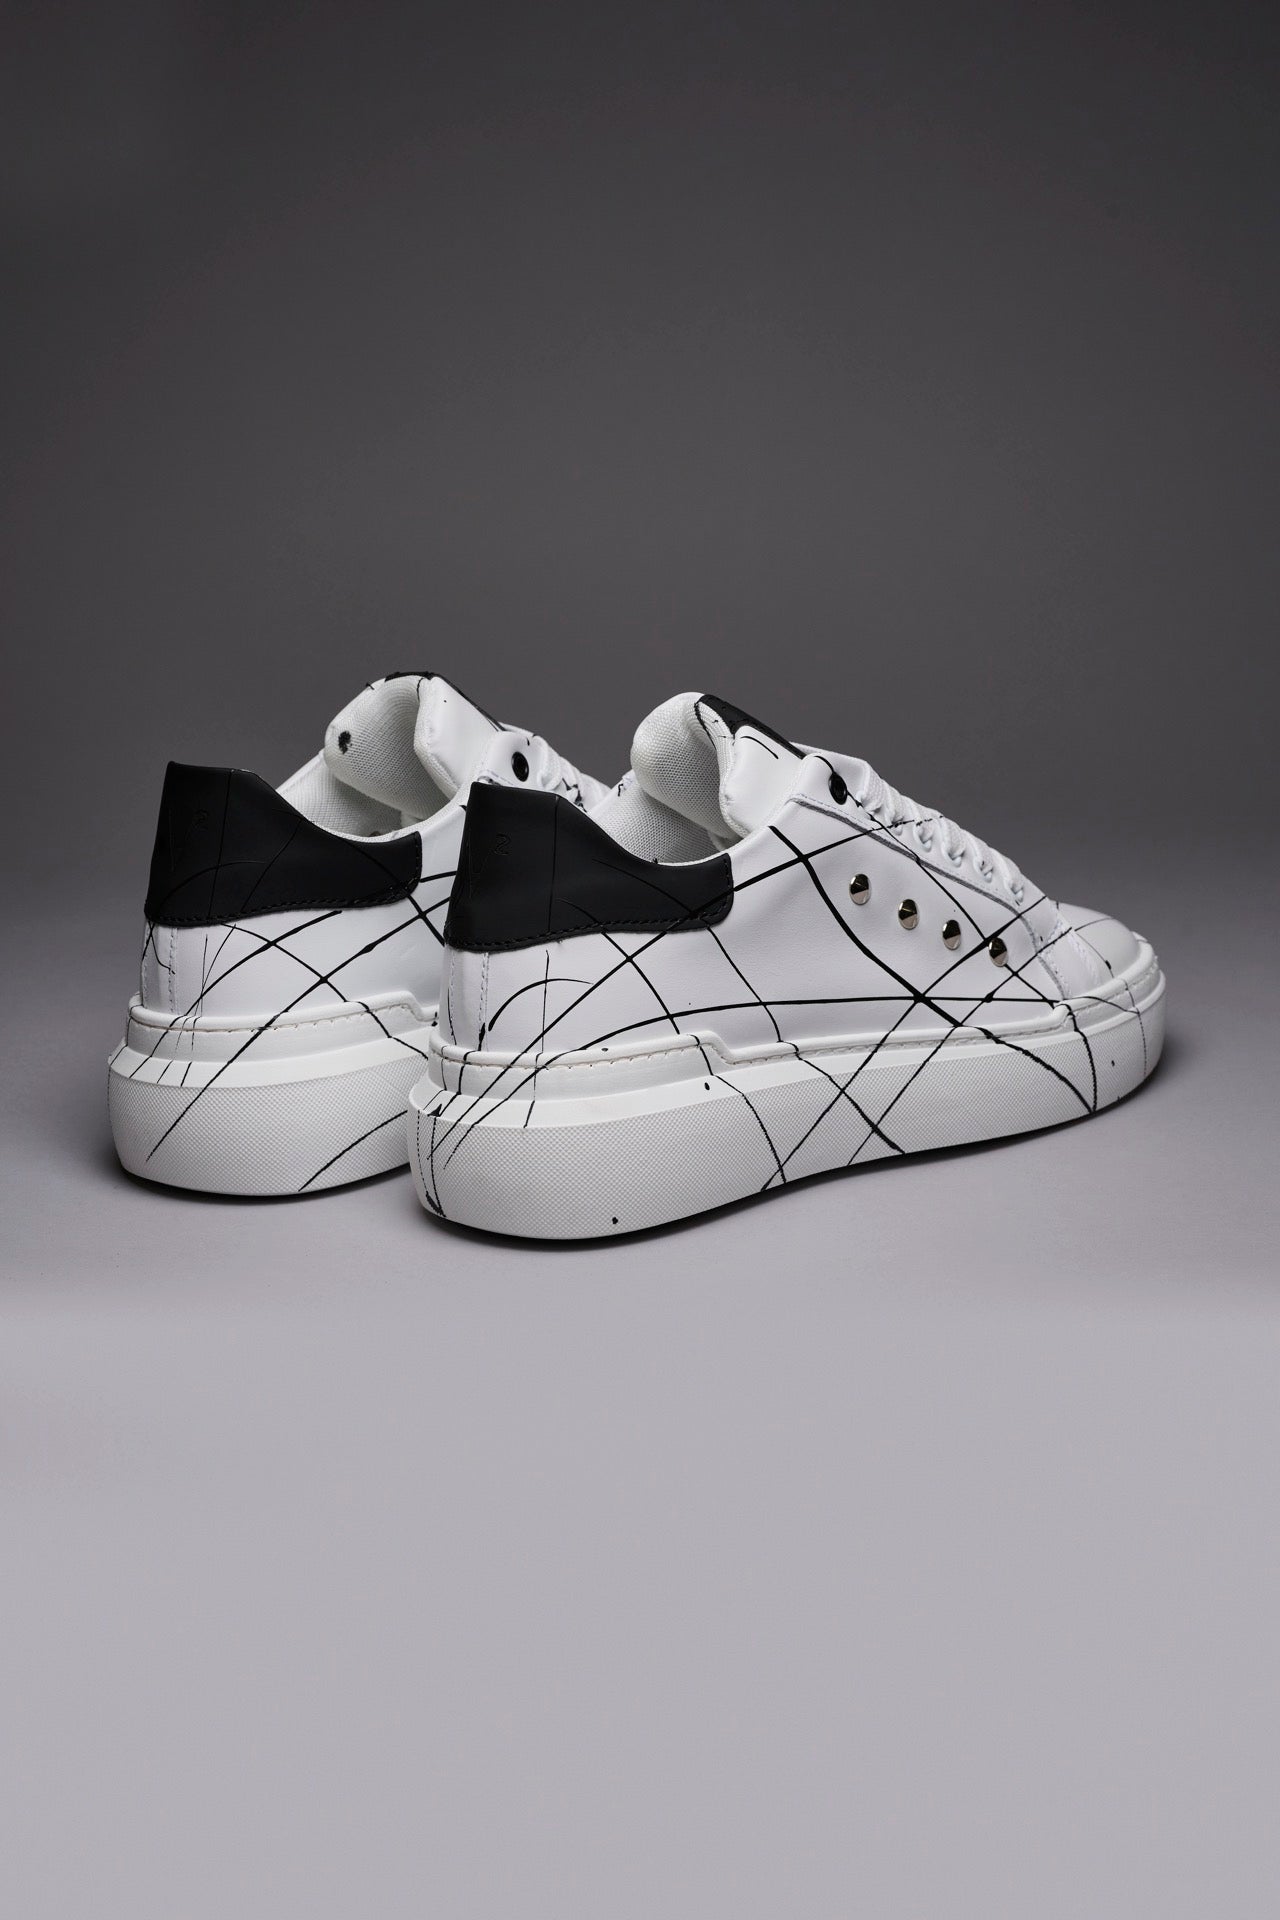 VEGA - Black back high sole sneakers with studs and paint splatters